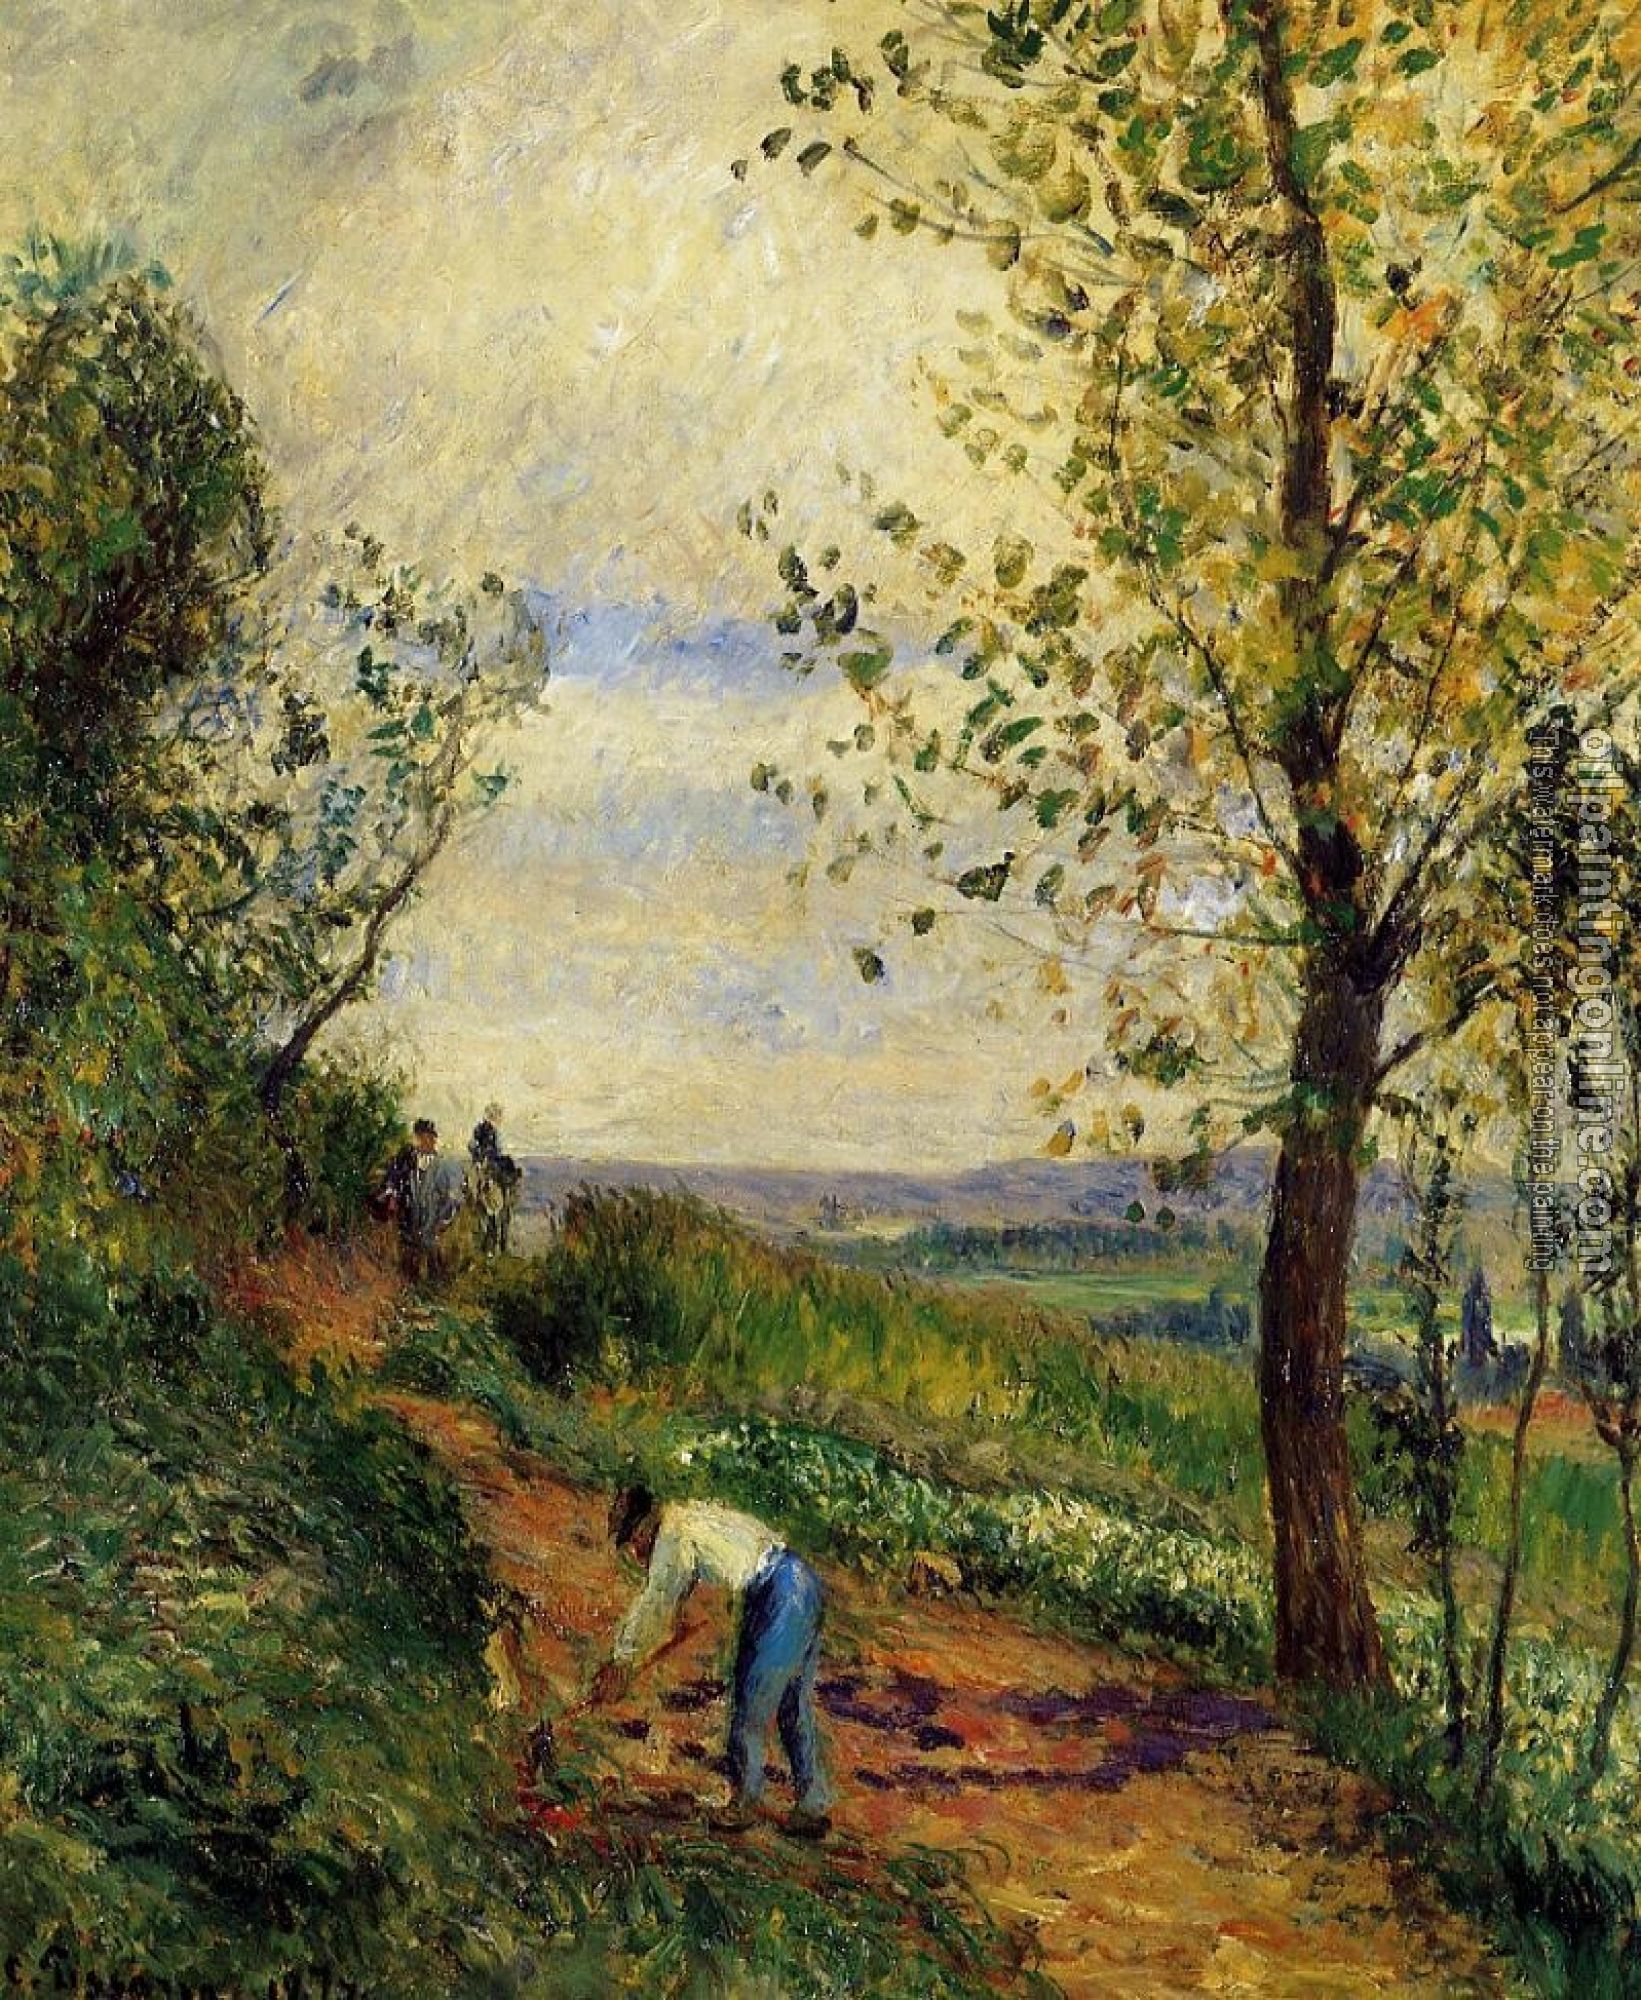 Pissarro, Camille - Landscape with a Man Digging